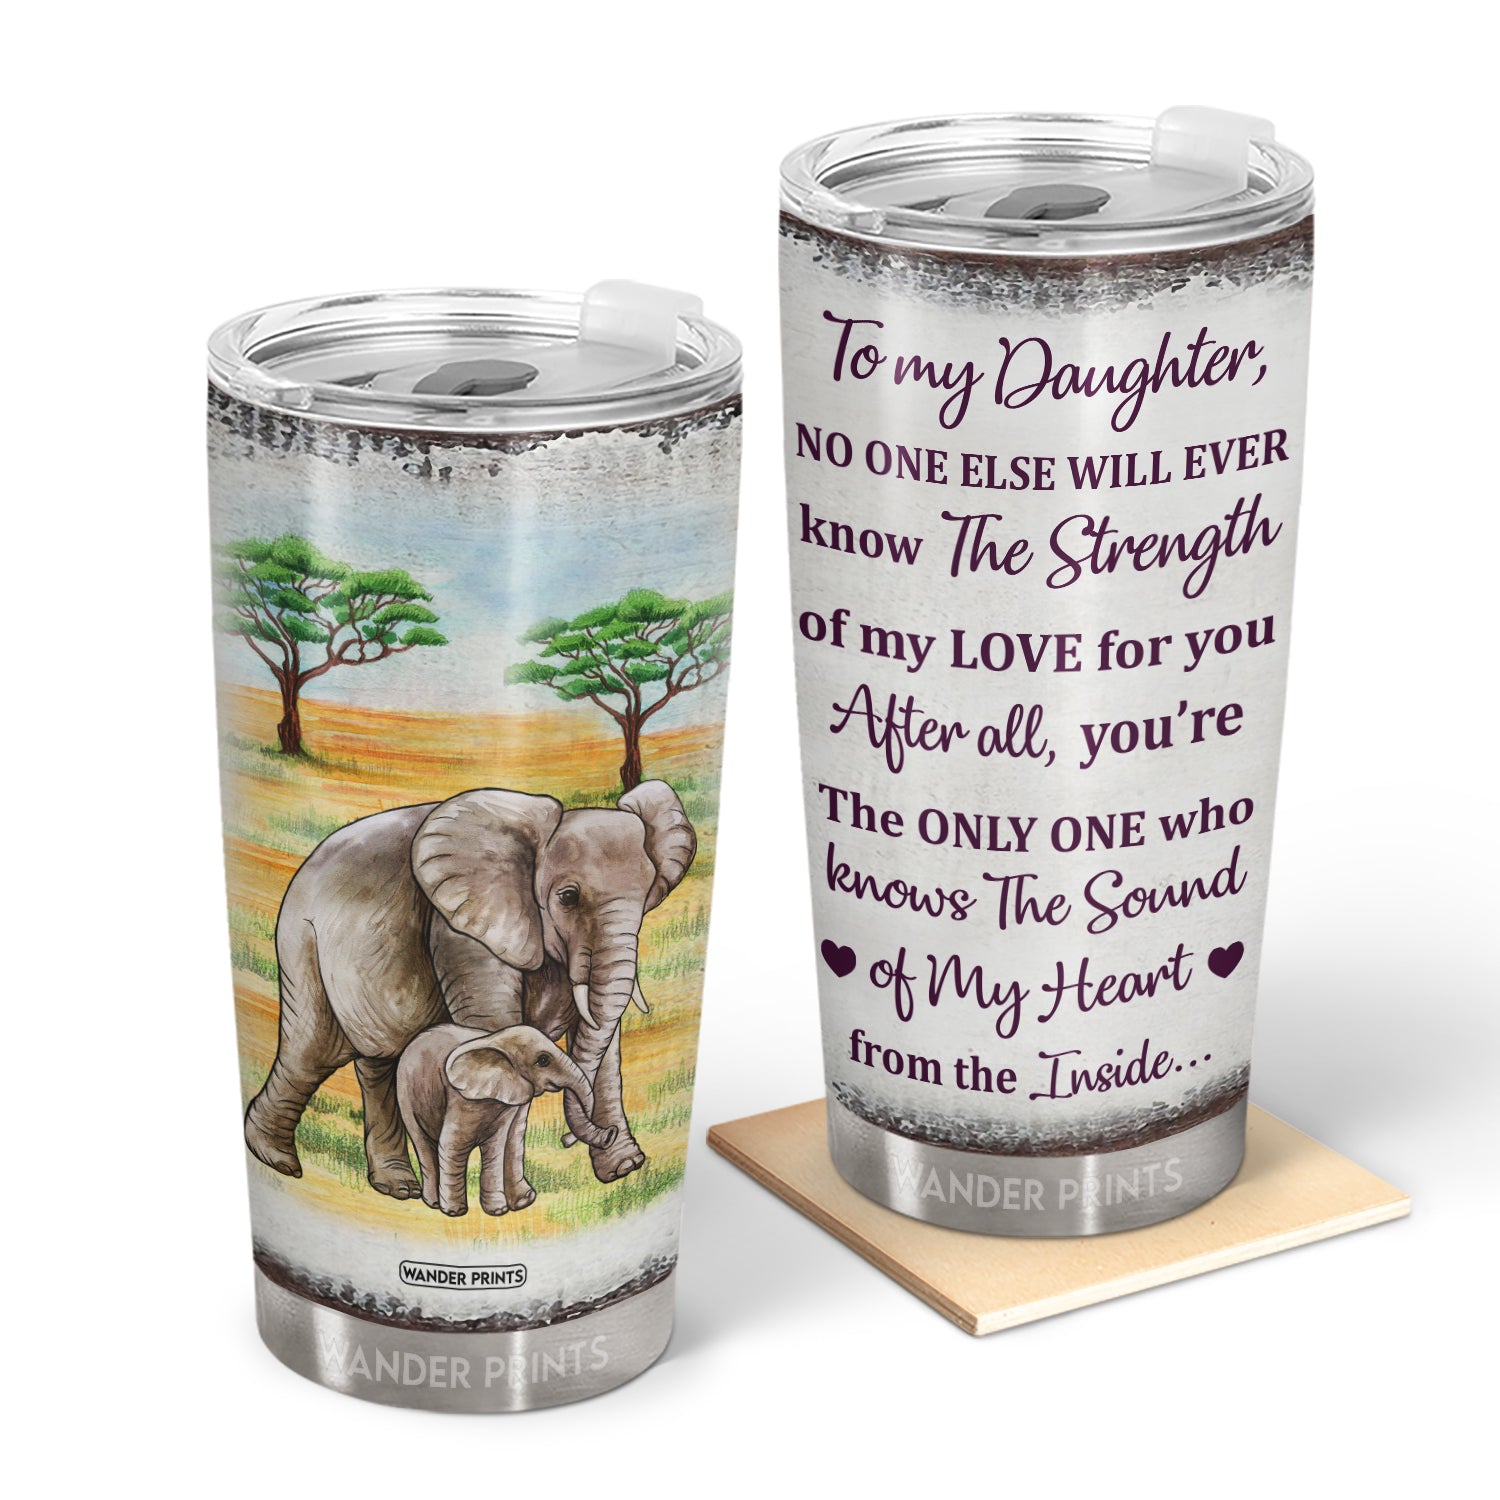 Wander Prints Daughter's Gifts - Birthday Gifts for Daughter & Daughter Gifts From Mom, Grandma - Stainless Steel Elephant Tumbler 20oz Gifts from Mom, To Daughter Strength Of My Love For You Travel Coffe Mug with Lid